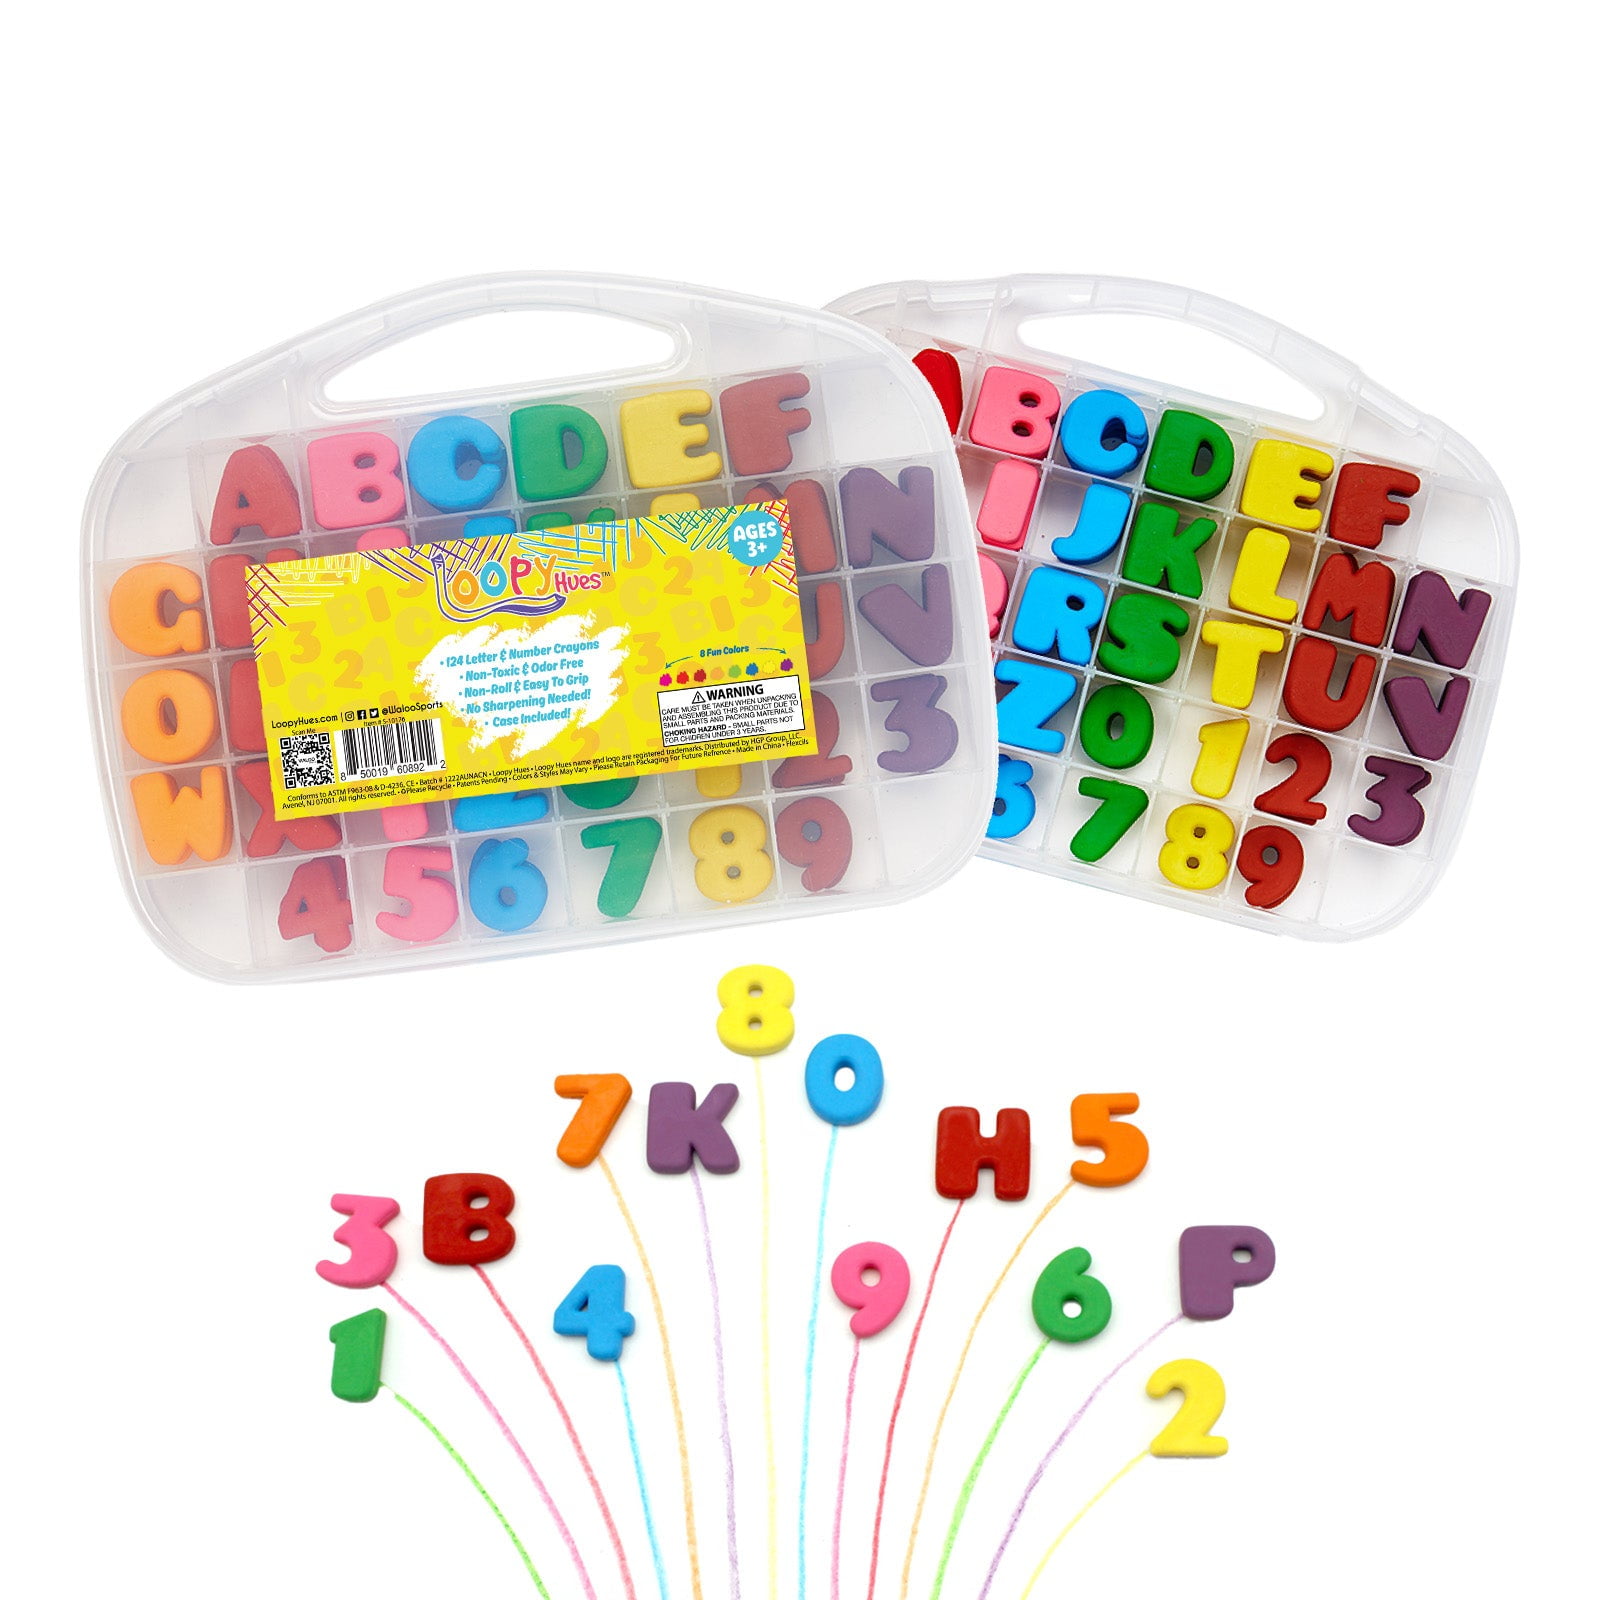 Unwrapped Crayons in Bulk - Premium Paperless Crayons with No Paper Wr